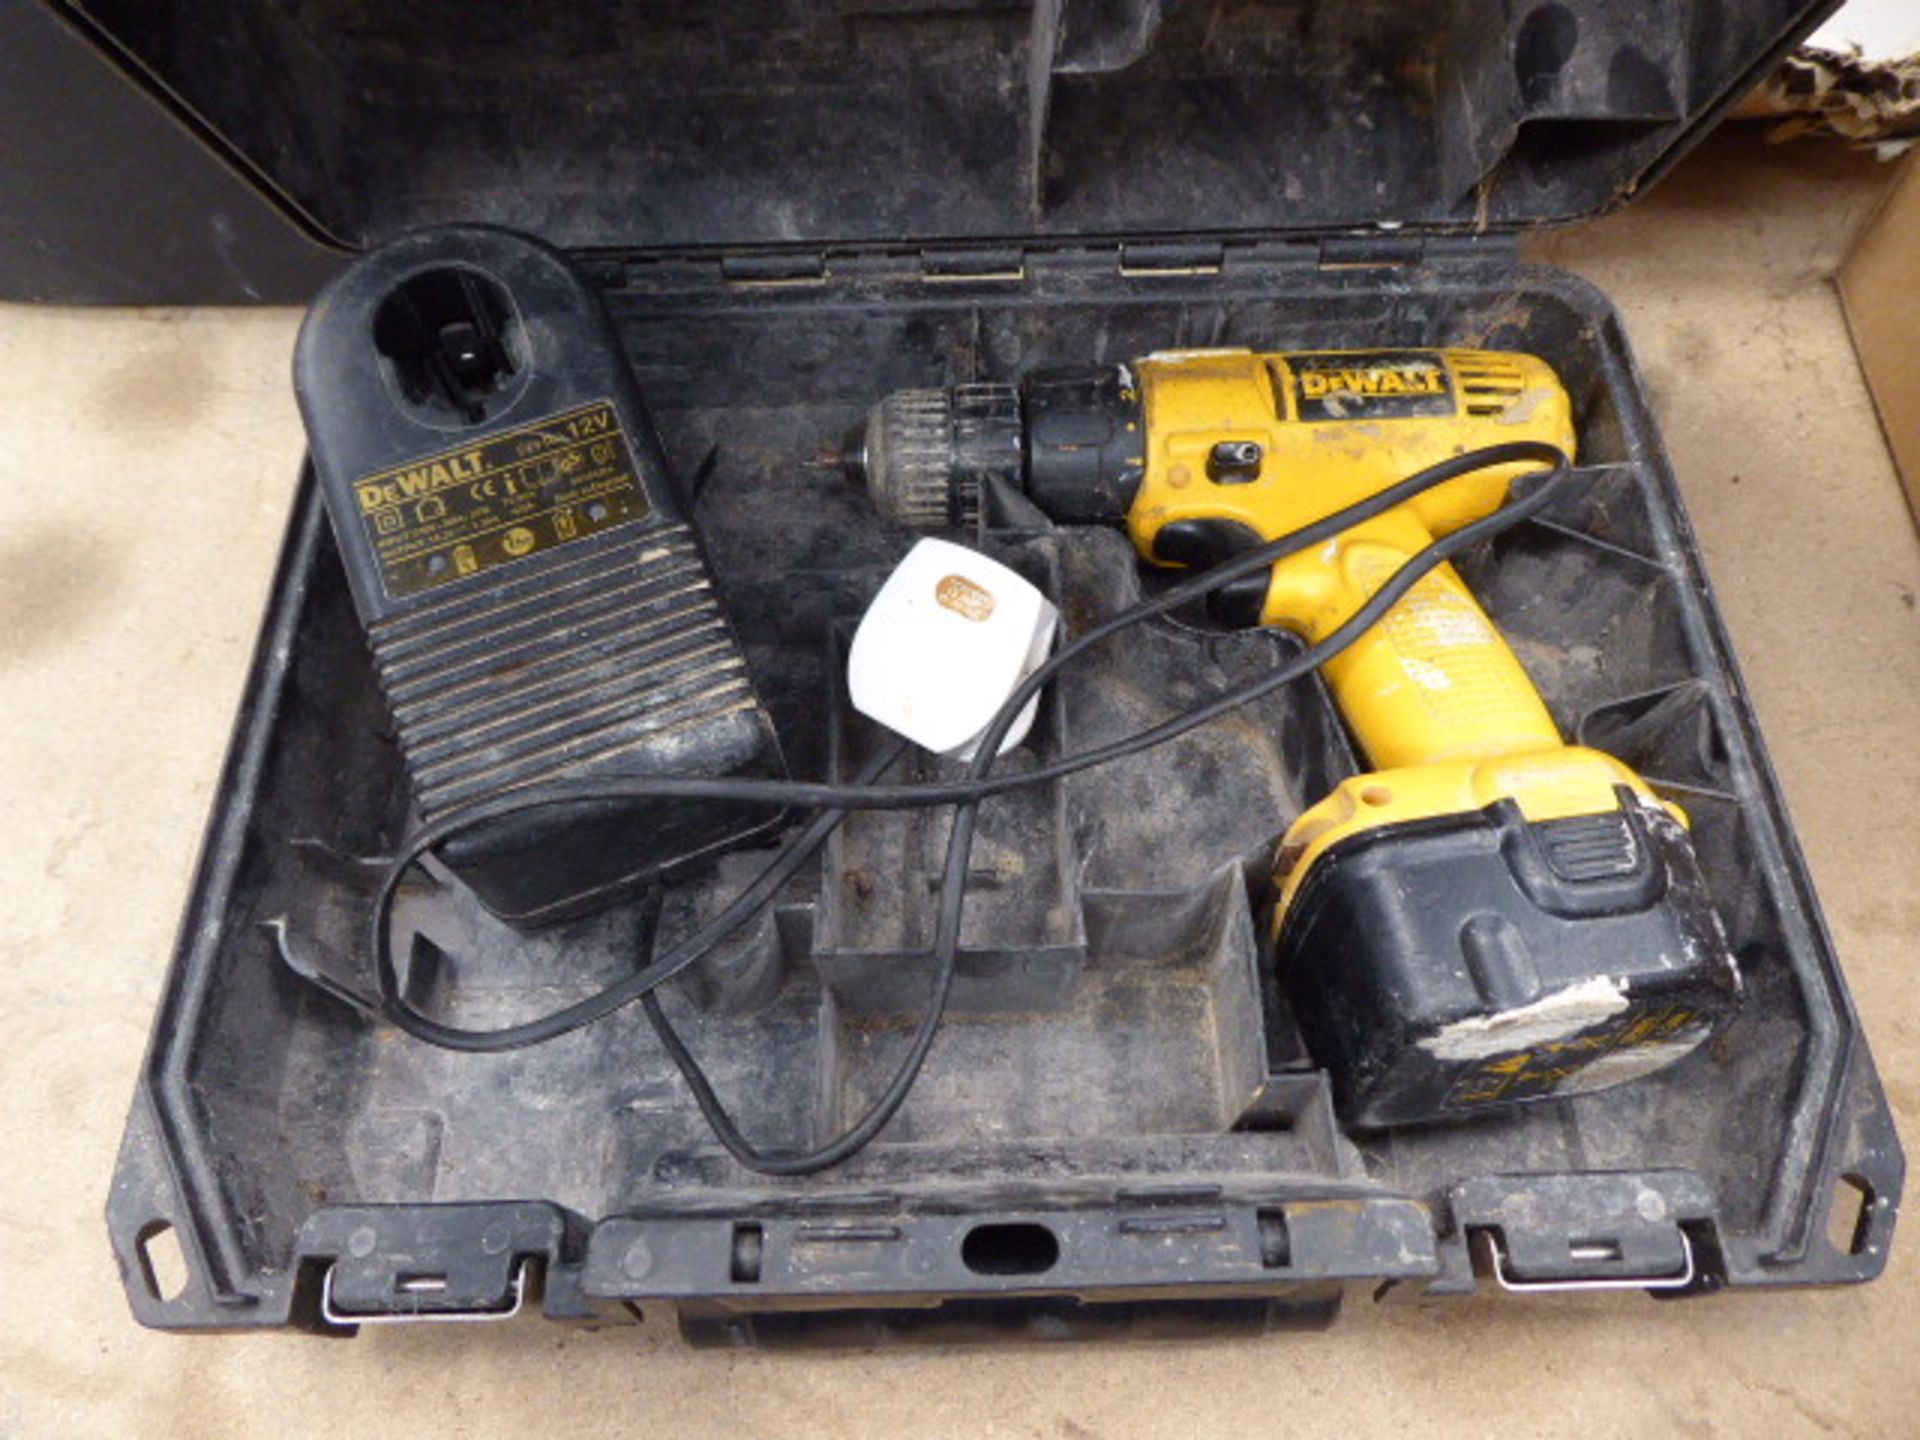 Dewalt cordless drill with 1 battery and charger